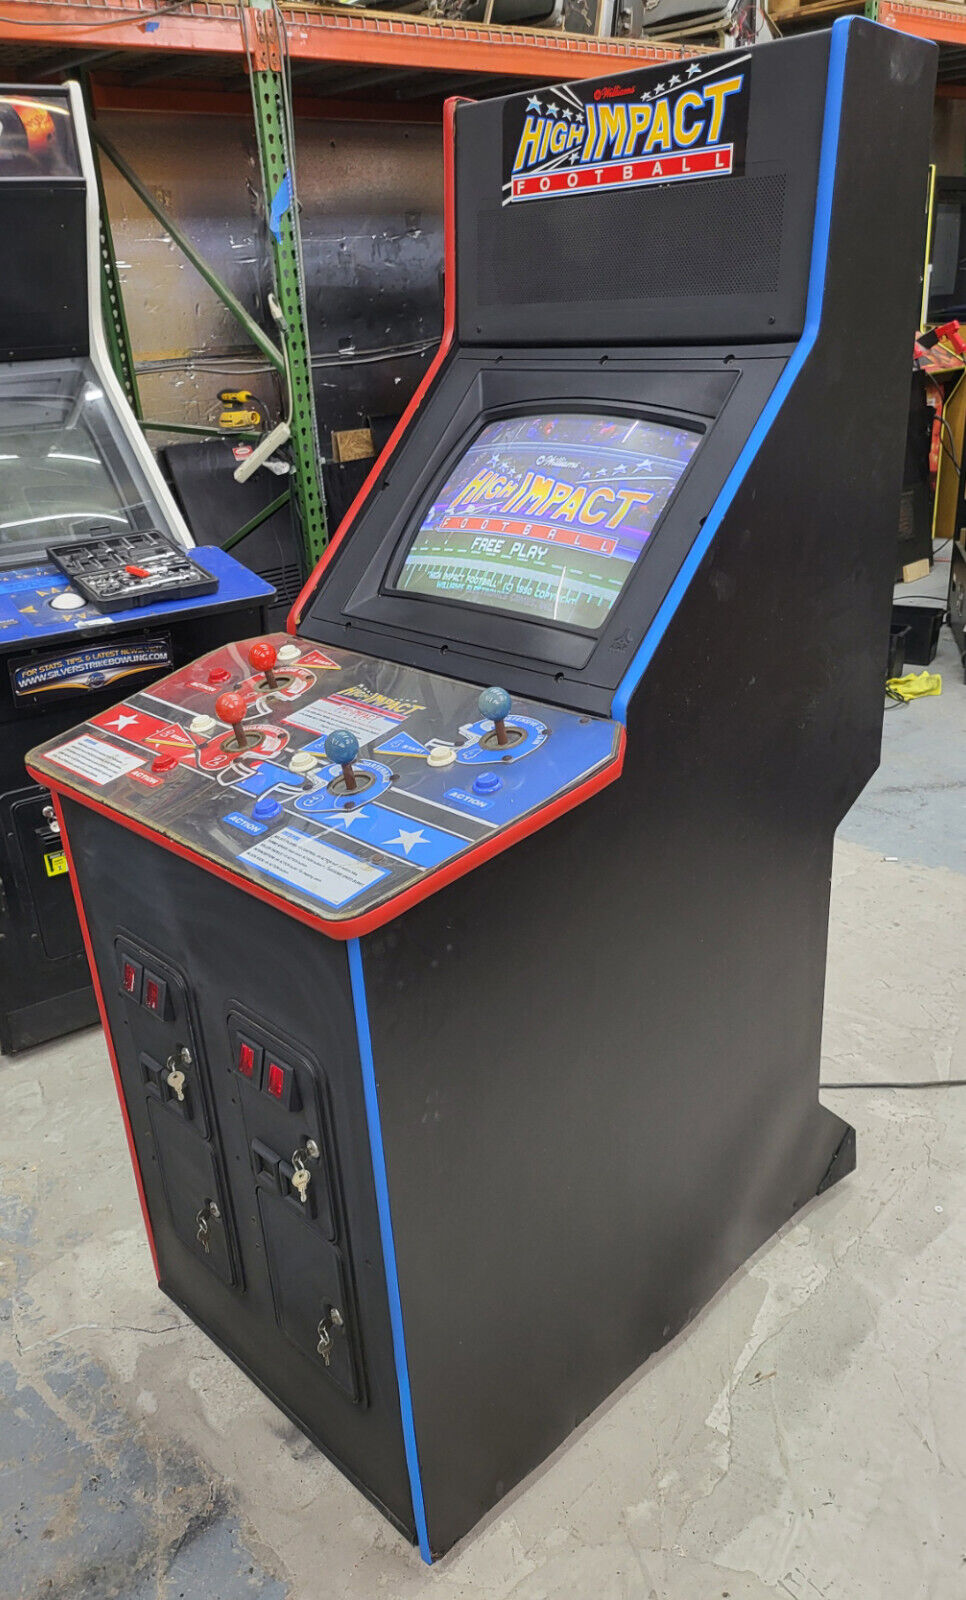 HIGH IMPACT FOOTBALL Full Size Sports 4 Player Arcade Game - CLASSIC Williams